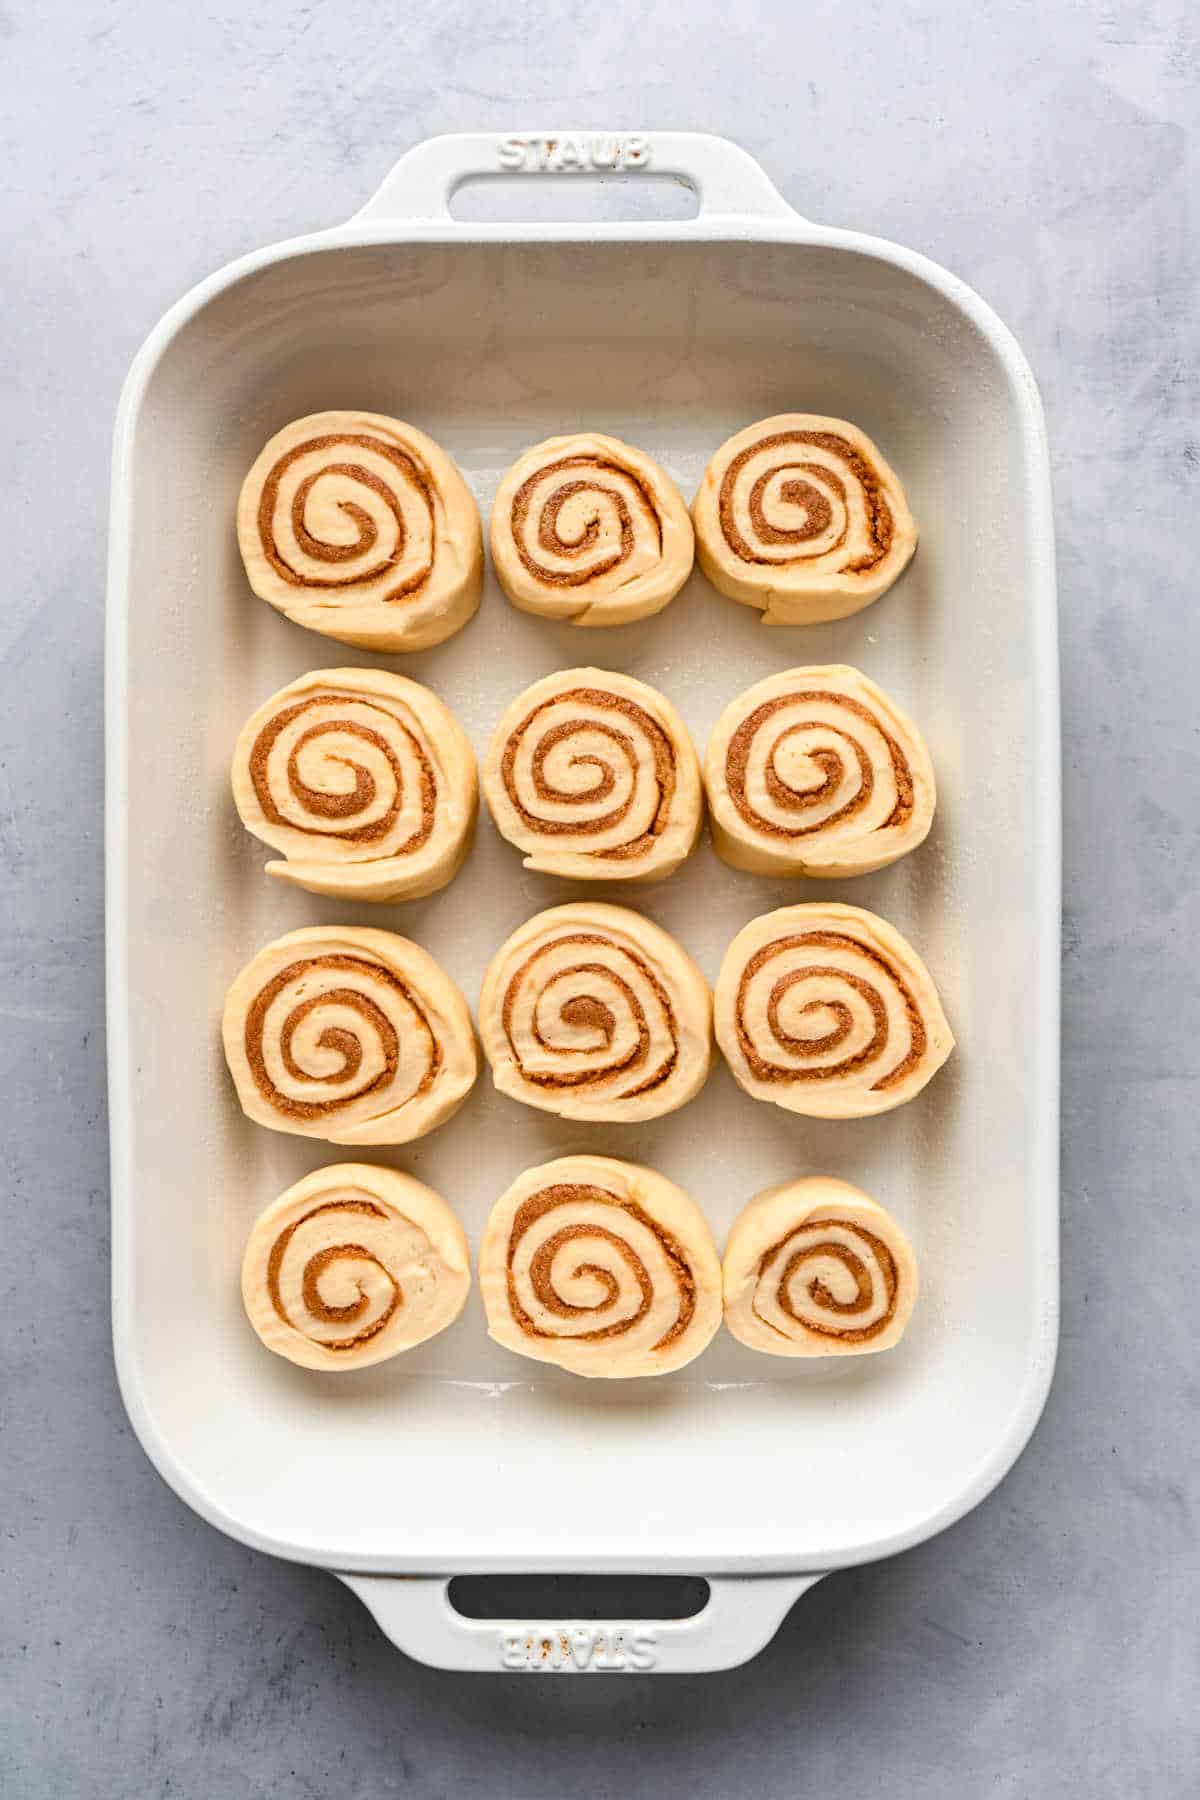 Unbaked maple cinnamon rolls in a white baking pan.